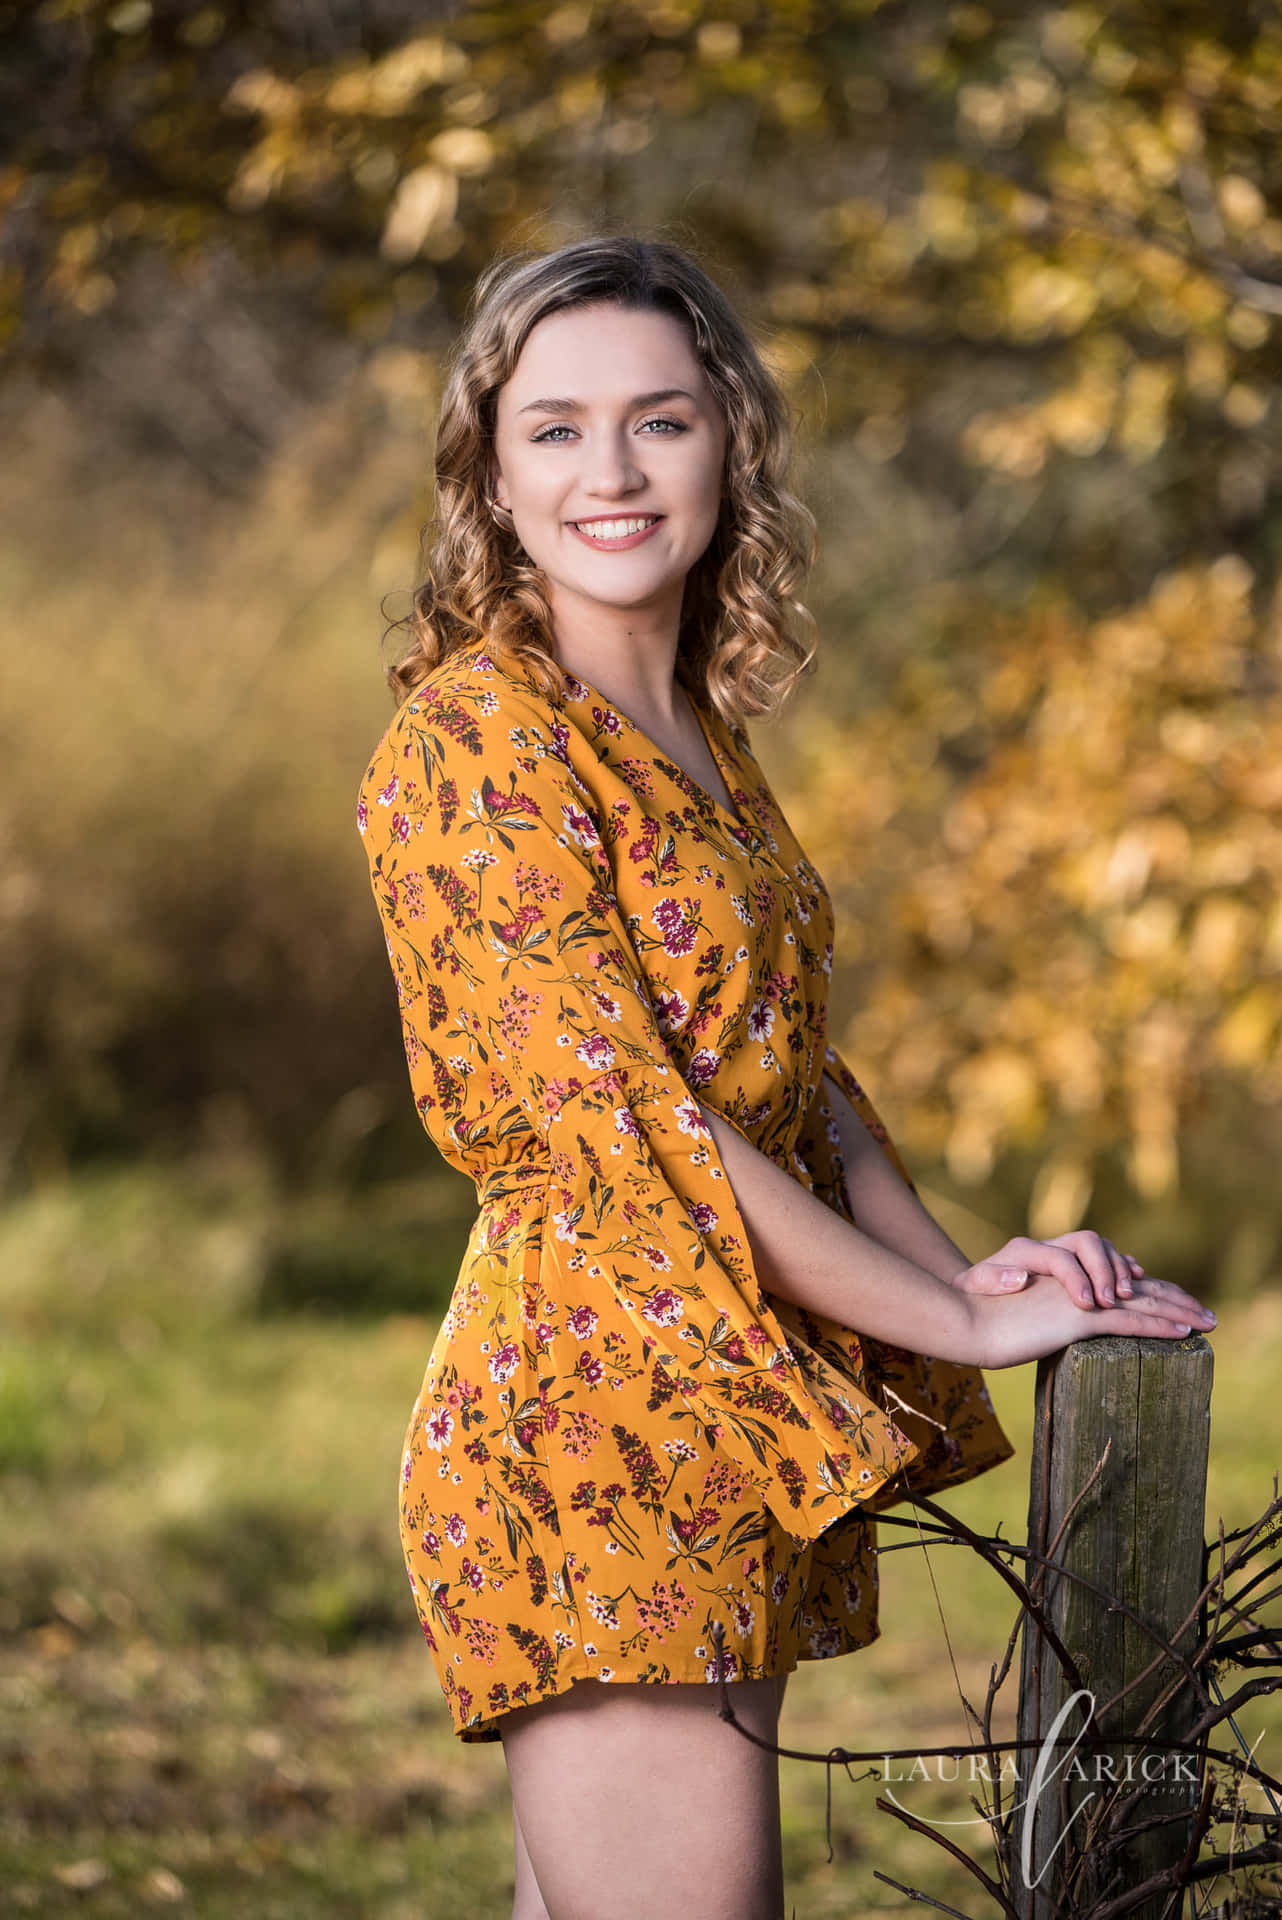 A Beautiful Young Woman In A Yellow Dress Leaning Against A Fence